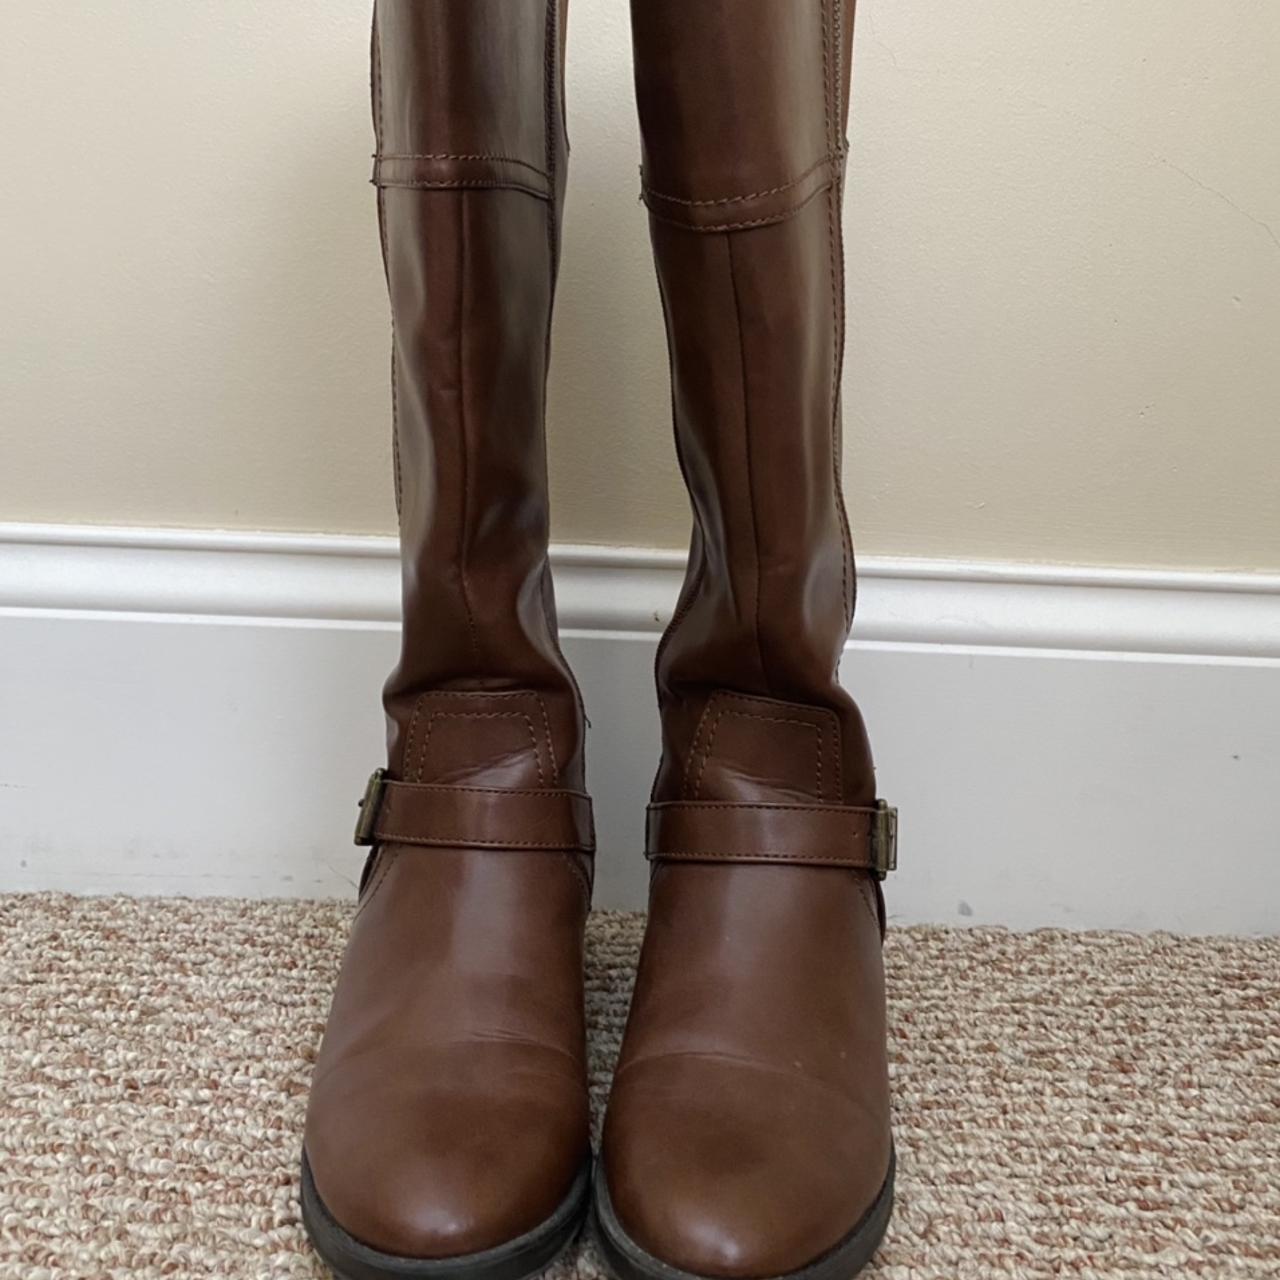 Target Women's Brown and Gold Boots (3)